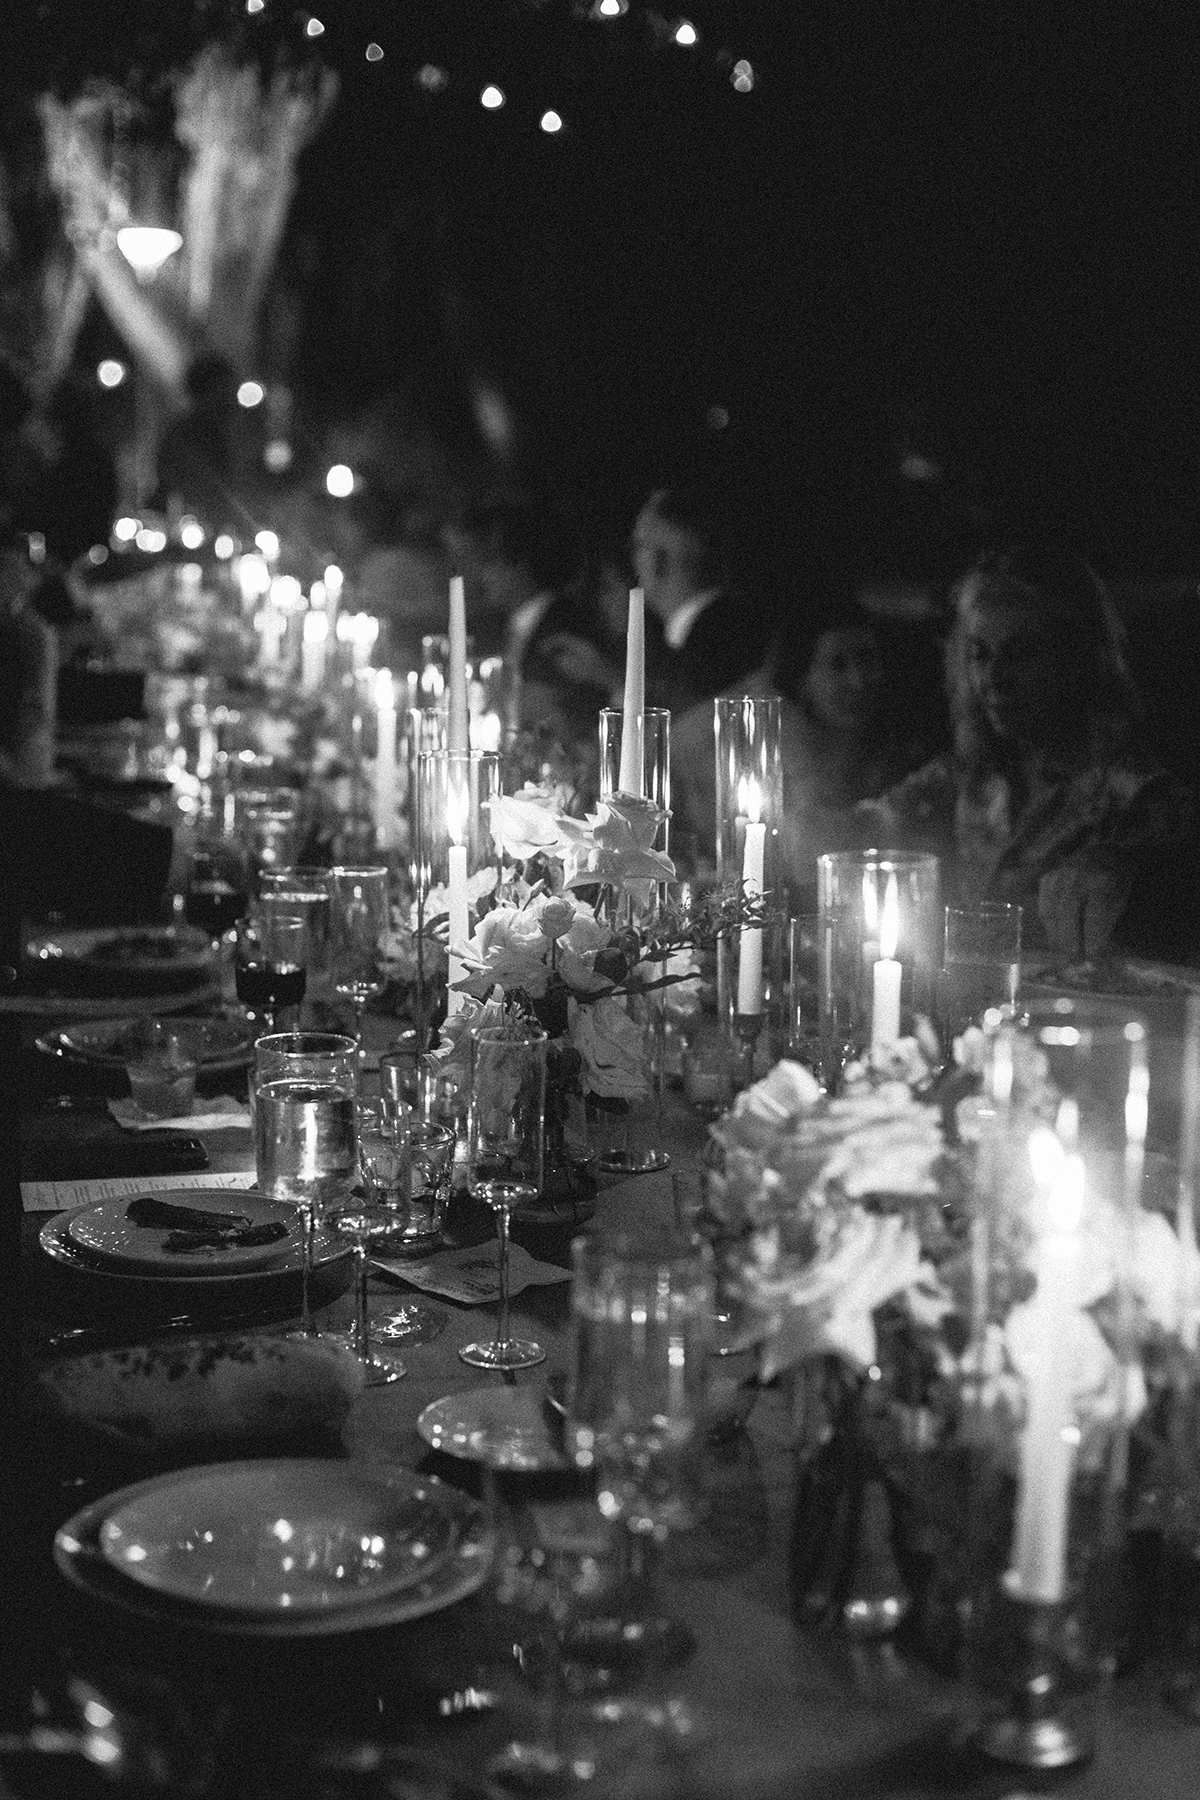 an elegant and dimly lit wedding dinner setting. The long table is adorned with numerous lit candles in tall holders, creating a warm, soft glow. The table is set with fine china and glassware, reflecting the flickering candlelight. Decorative floral arrangements add a touch of sophistication to the ambiance. The background is blurred, focusing attention on the candlelit table setting